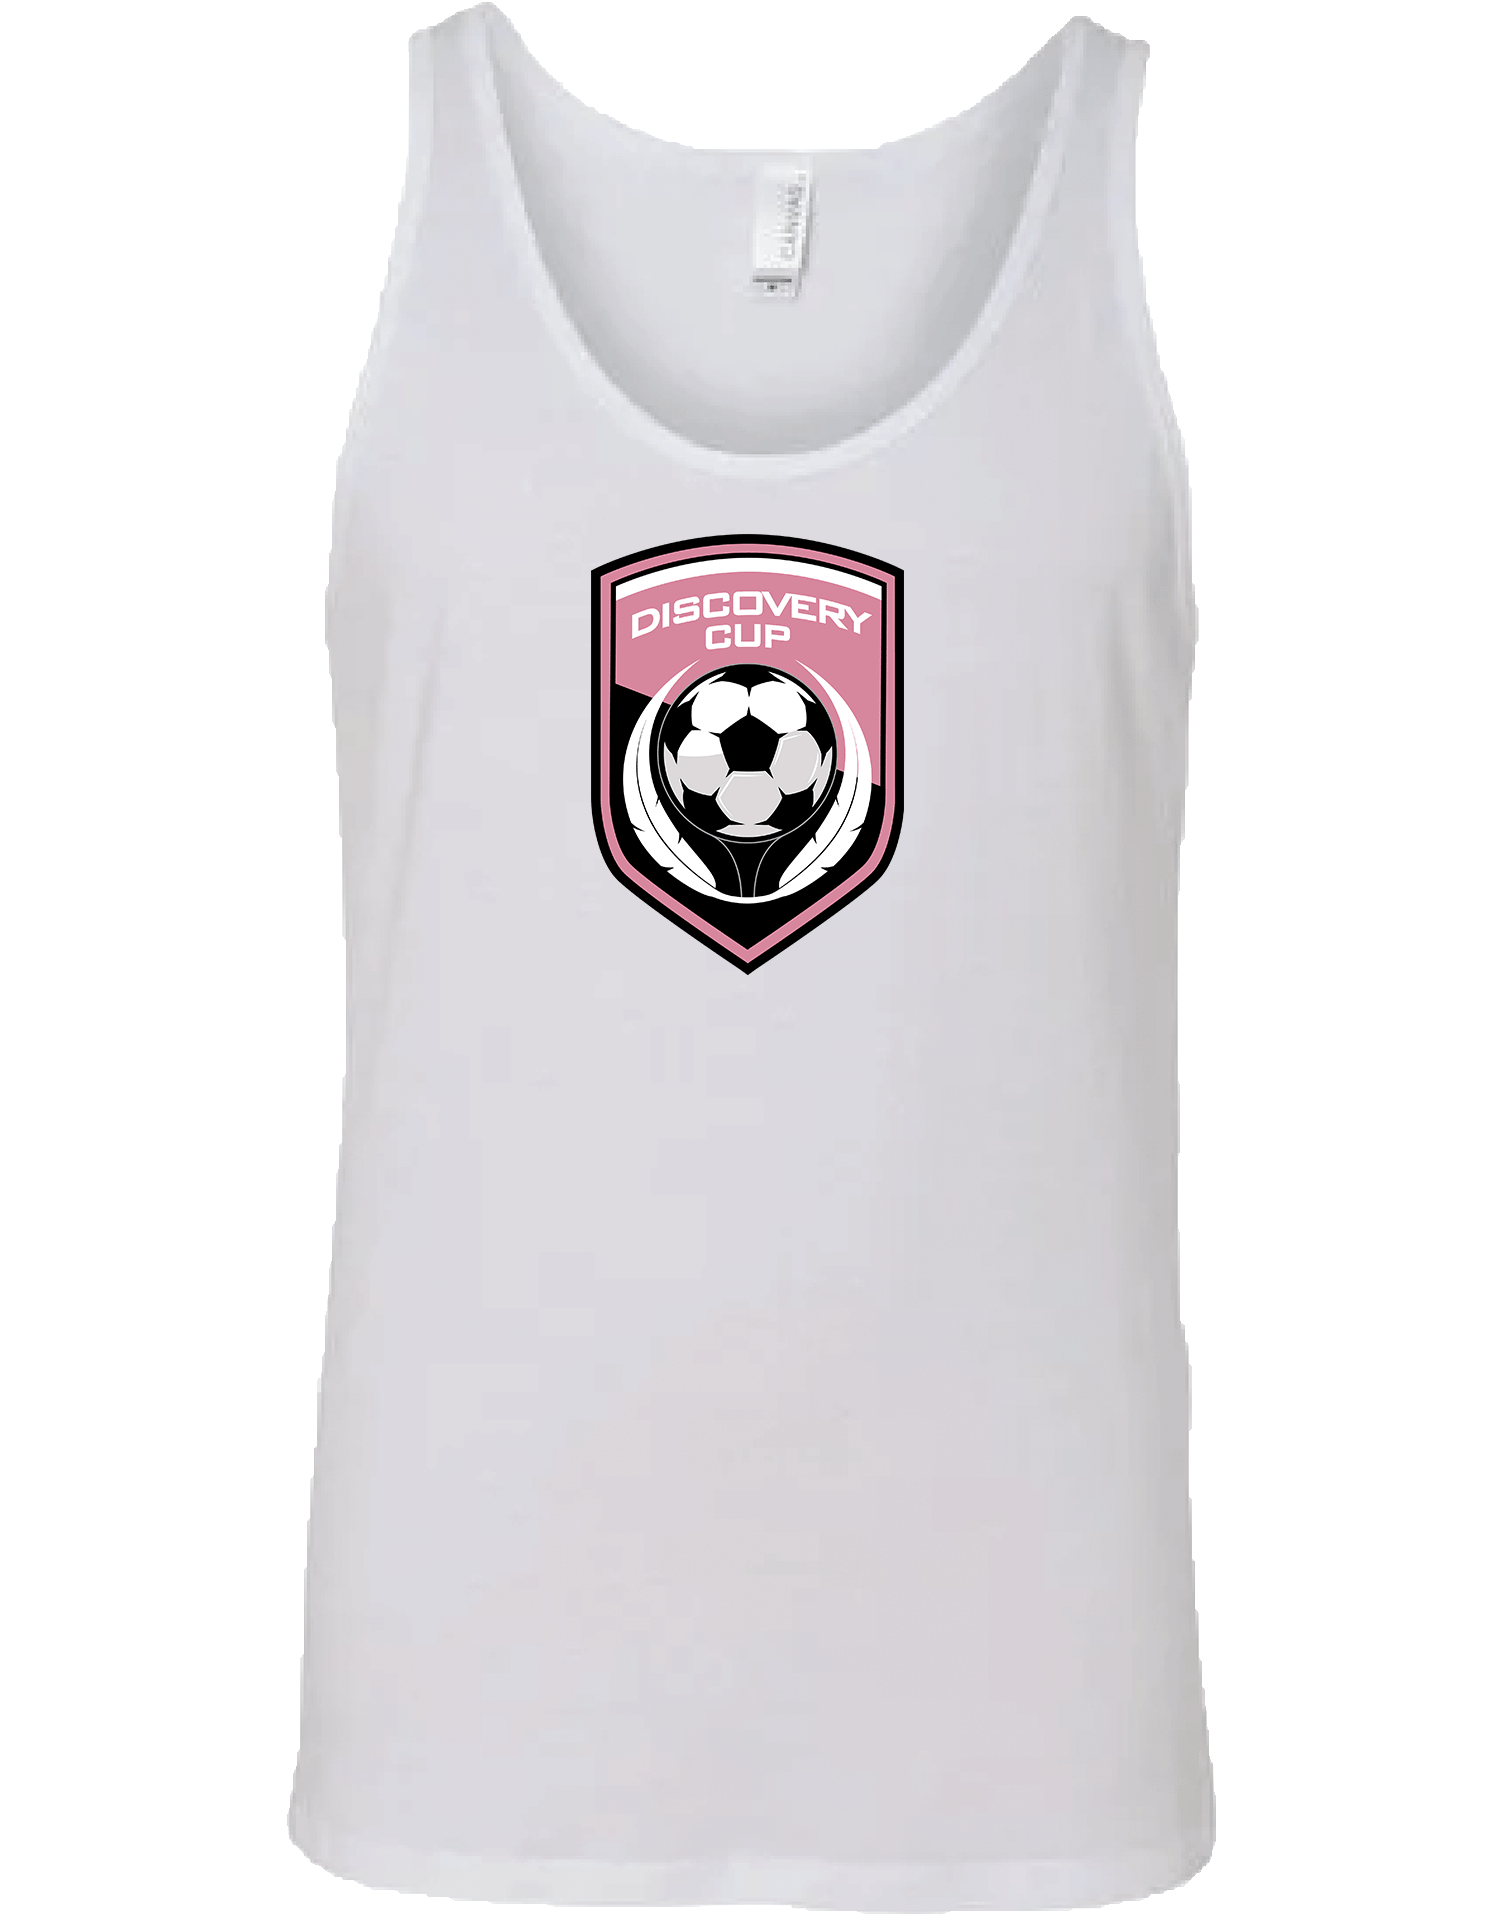 Tank Tops - 2023 Discovery Cup